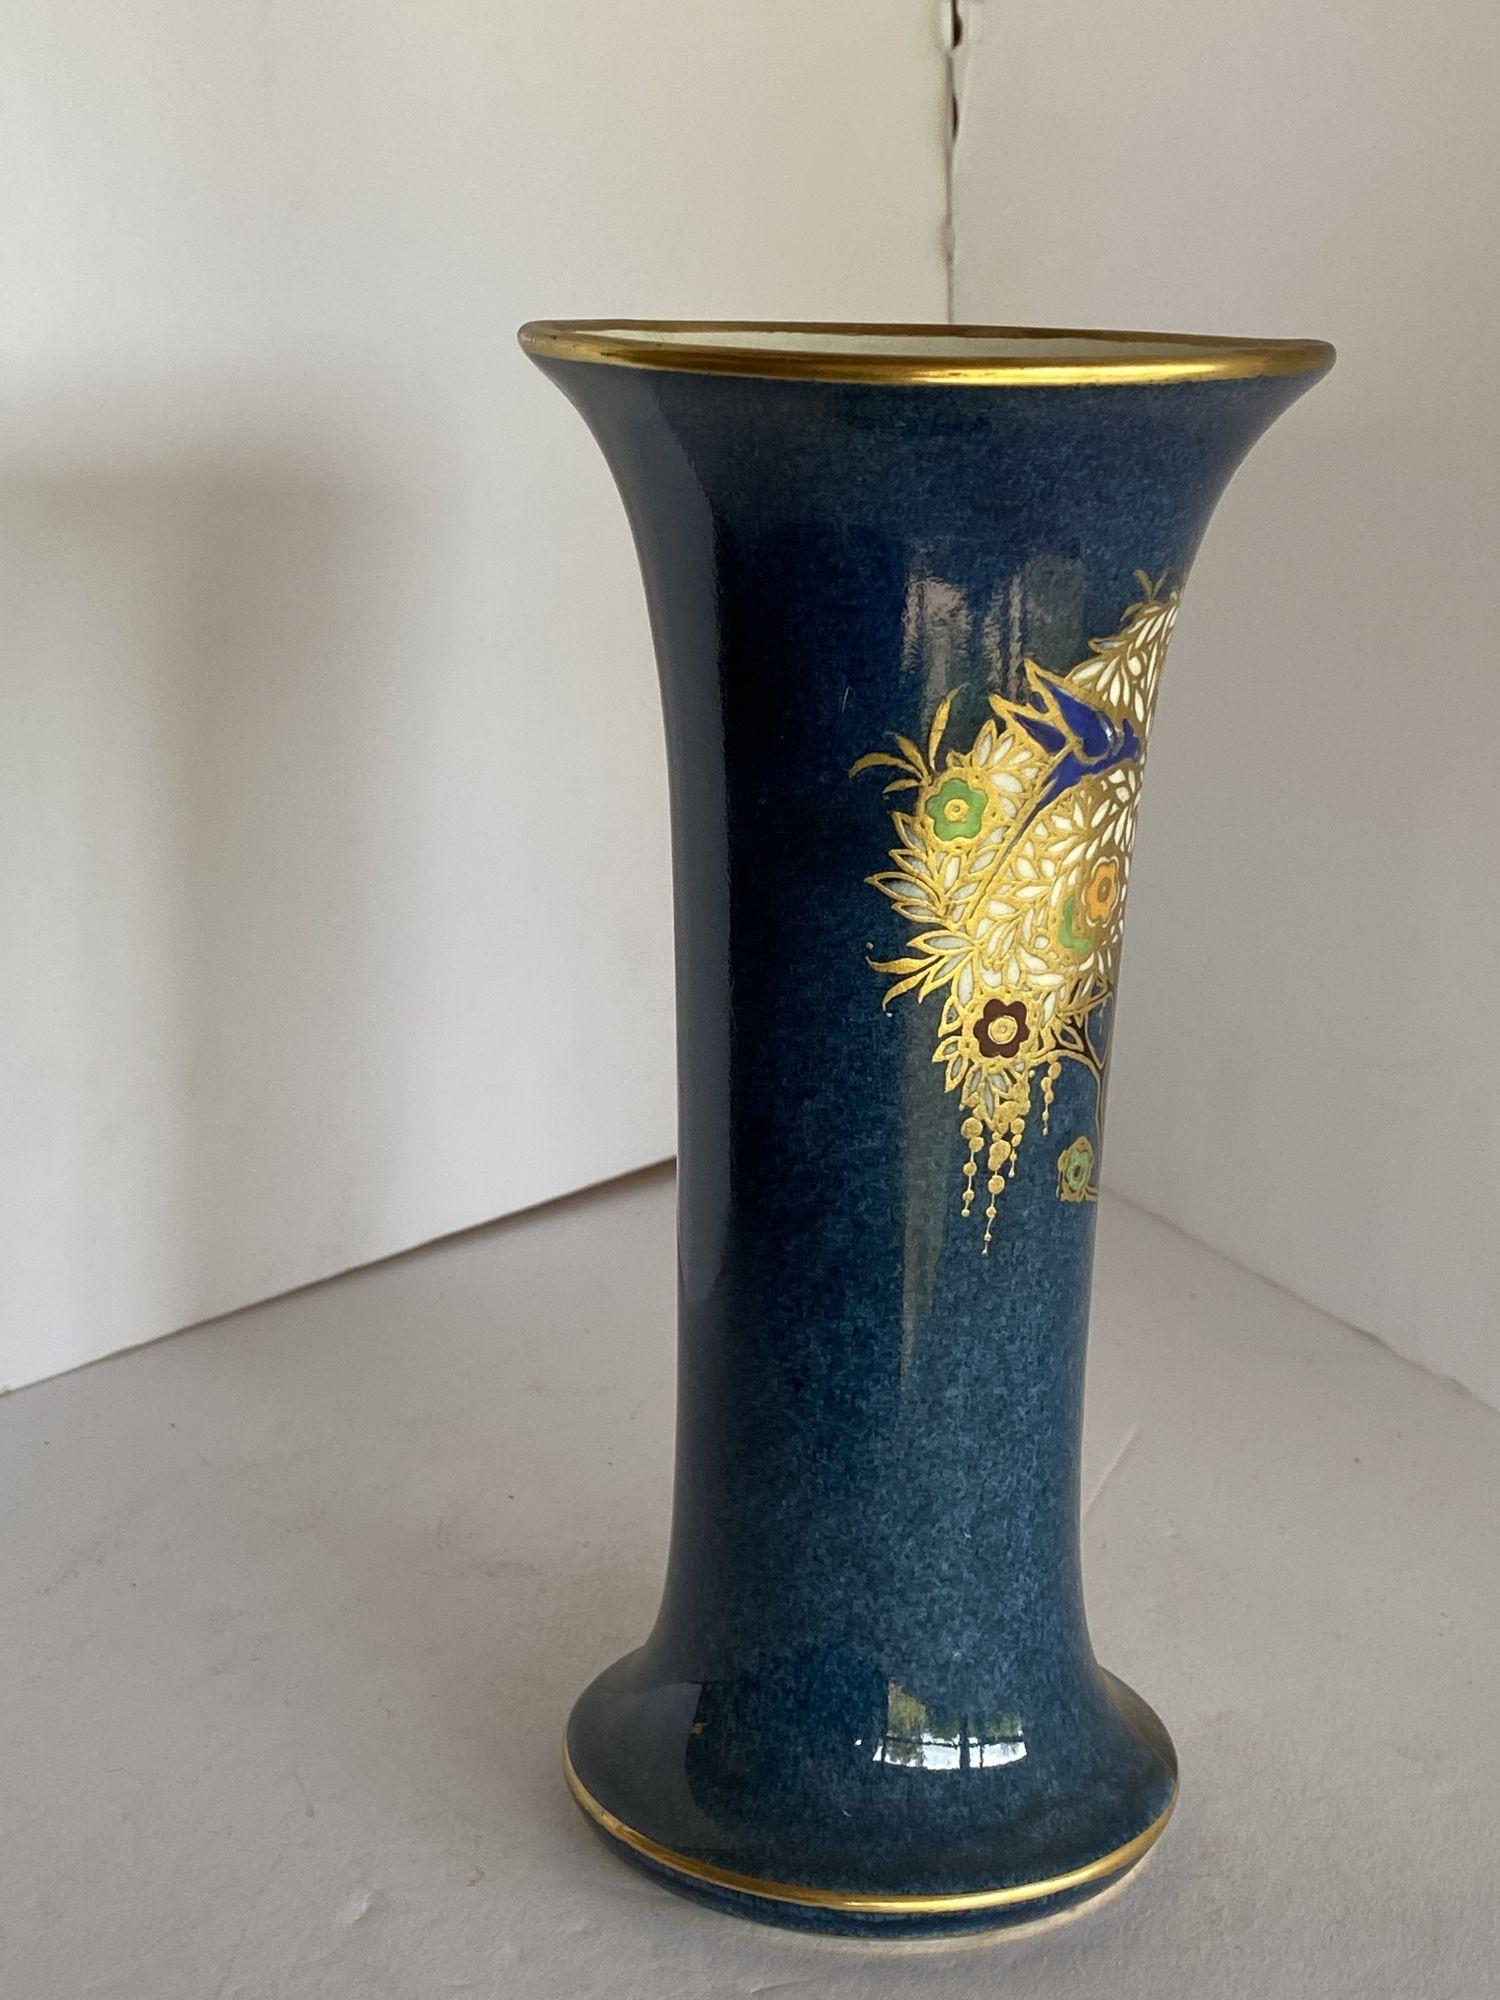 Gold Leaf Art Nouveau Ceramic Spill Vase by Royal Worcester In Excellent Condition For Sale In Van Nuys, CA